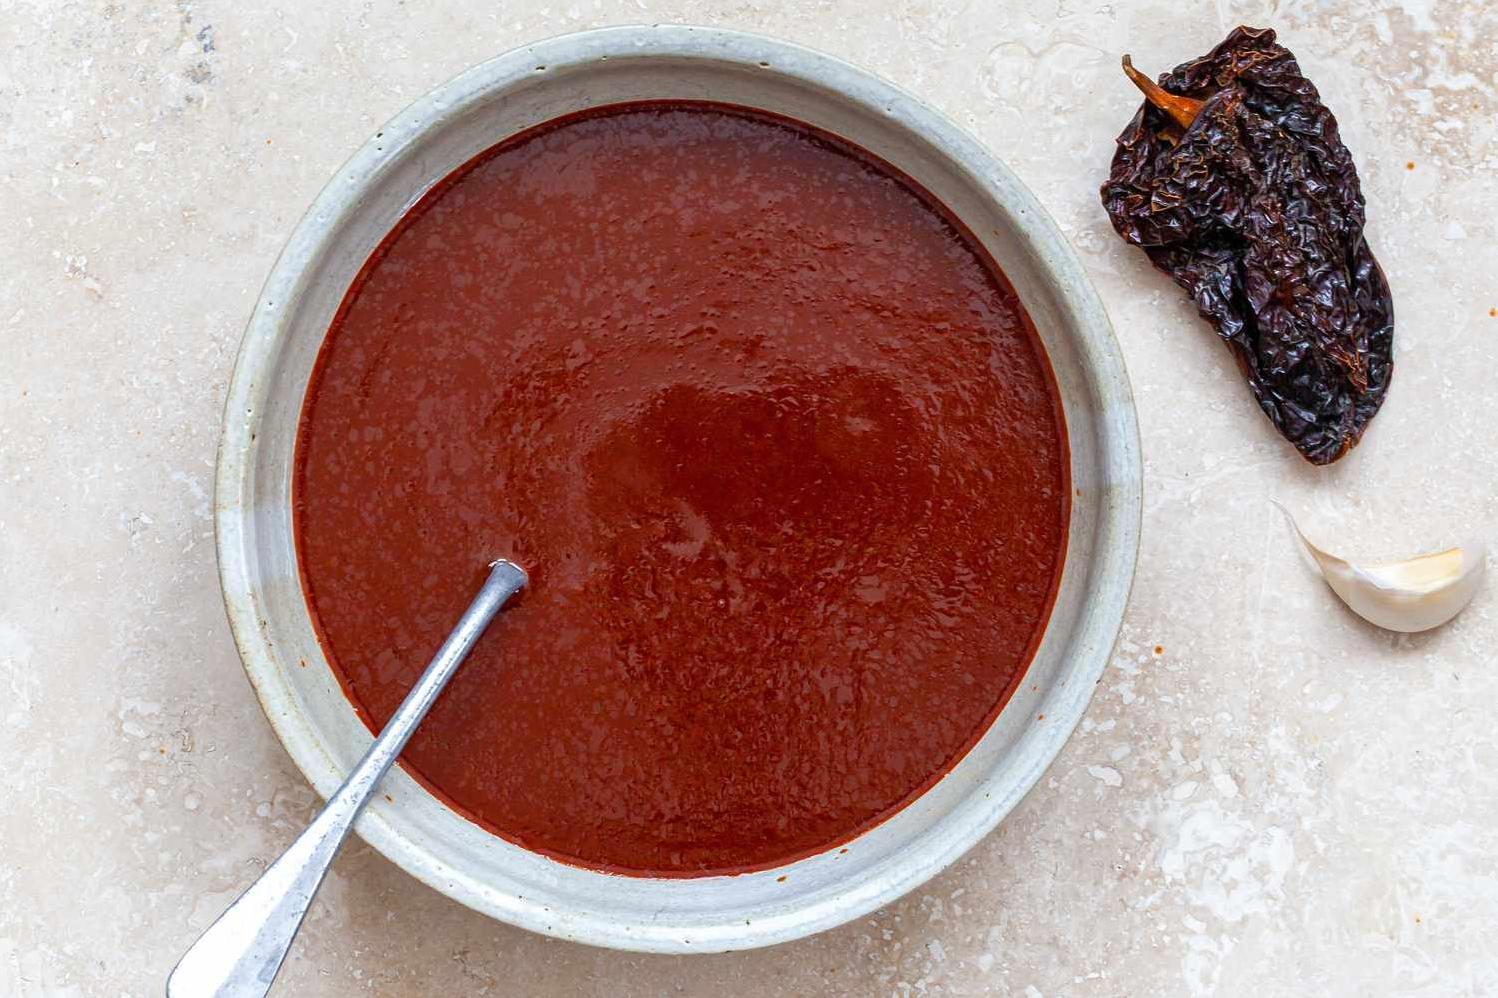  A satisfying red sauce that packs a punch of flavor!